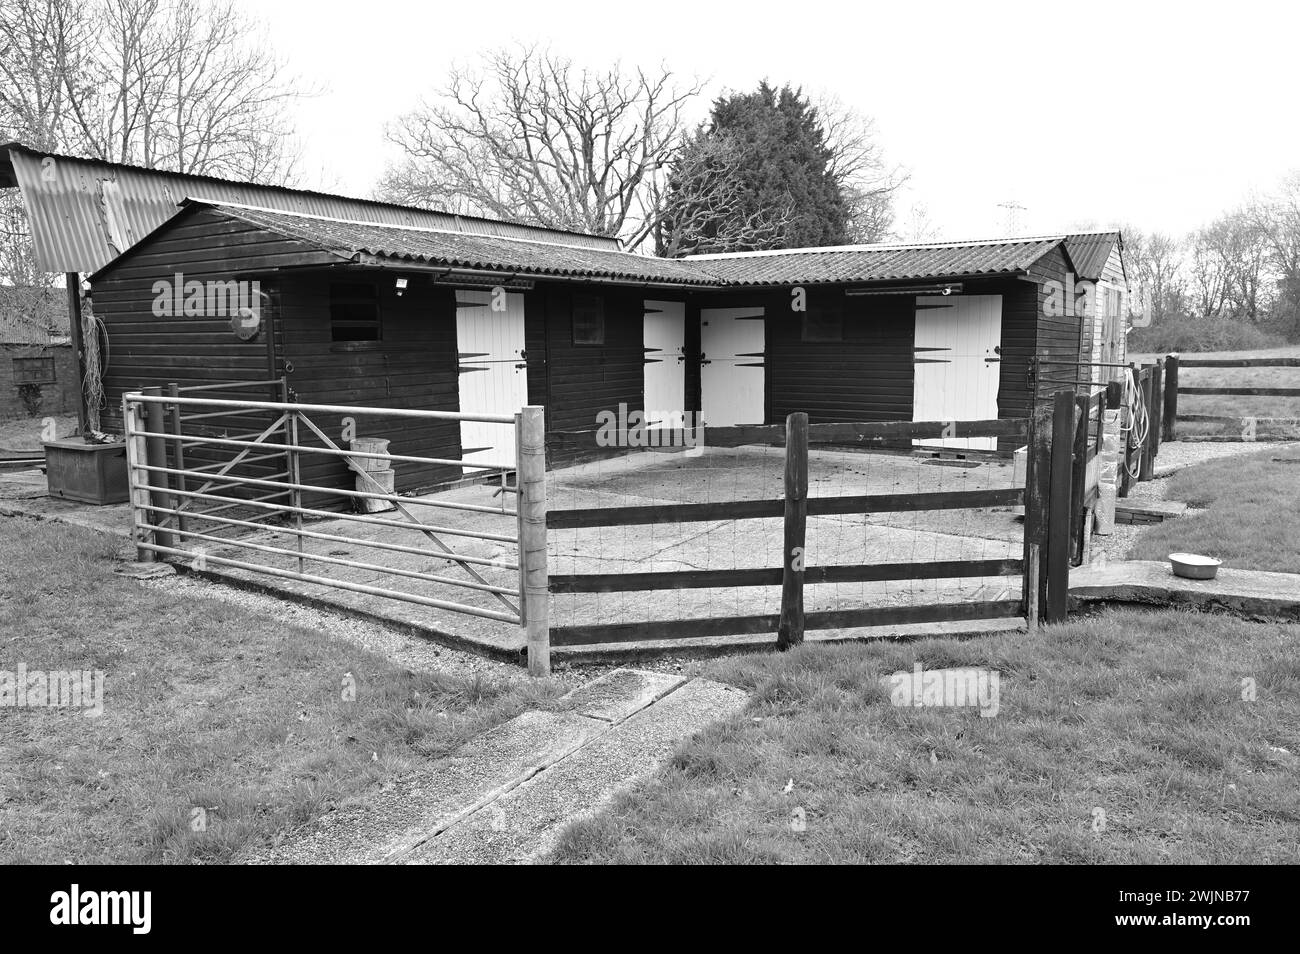 Stables and a Stables yard for horses in the UK Stock Photo